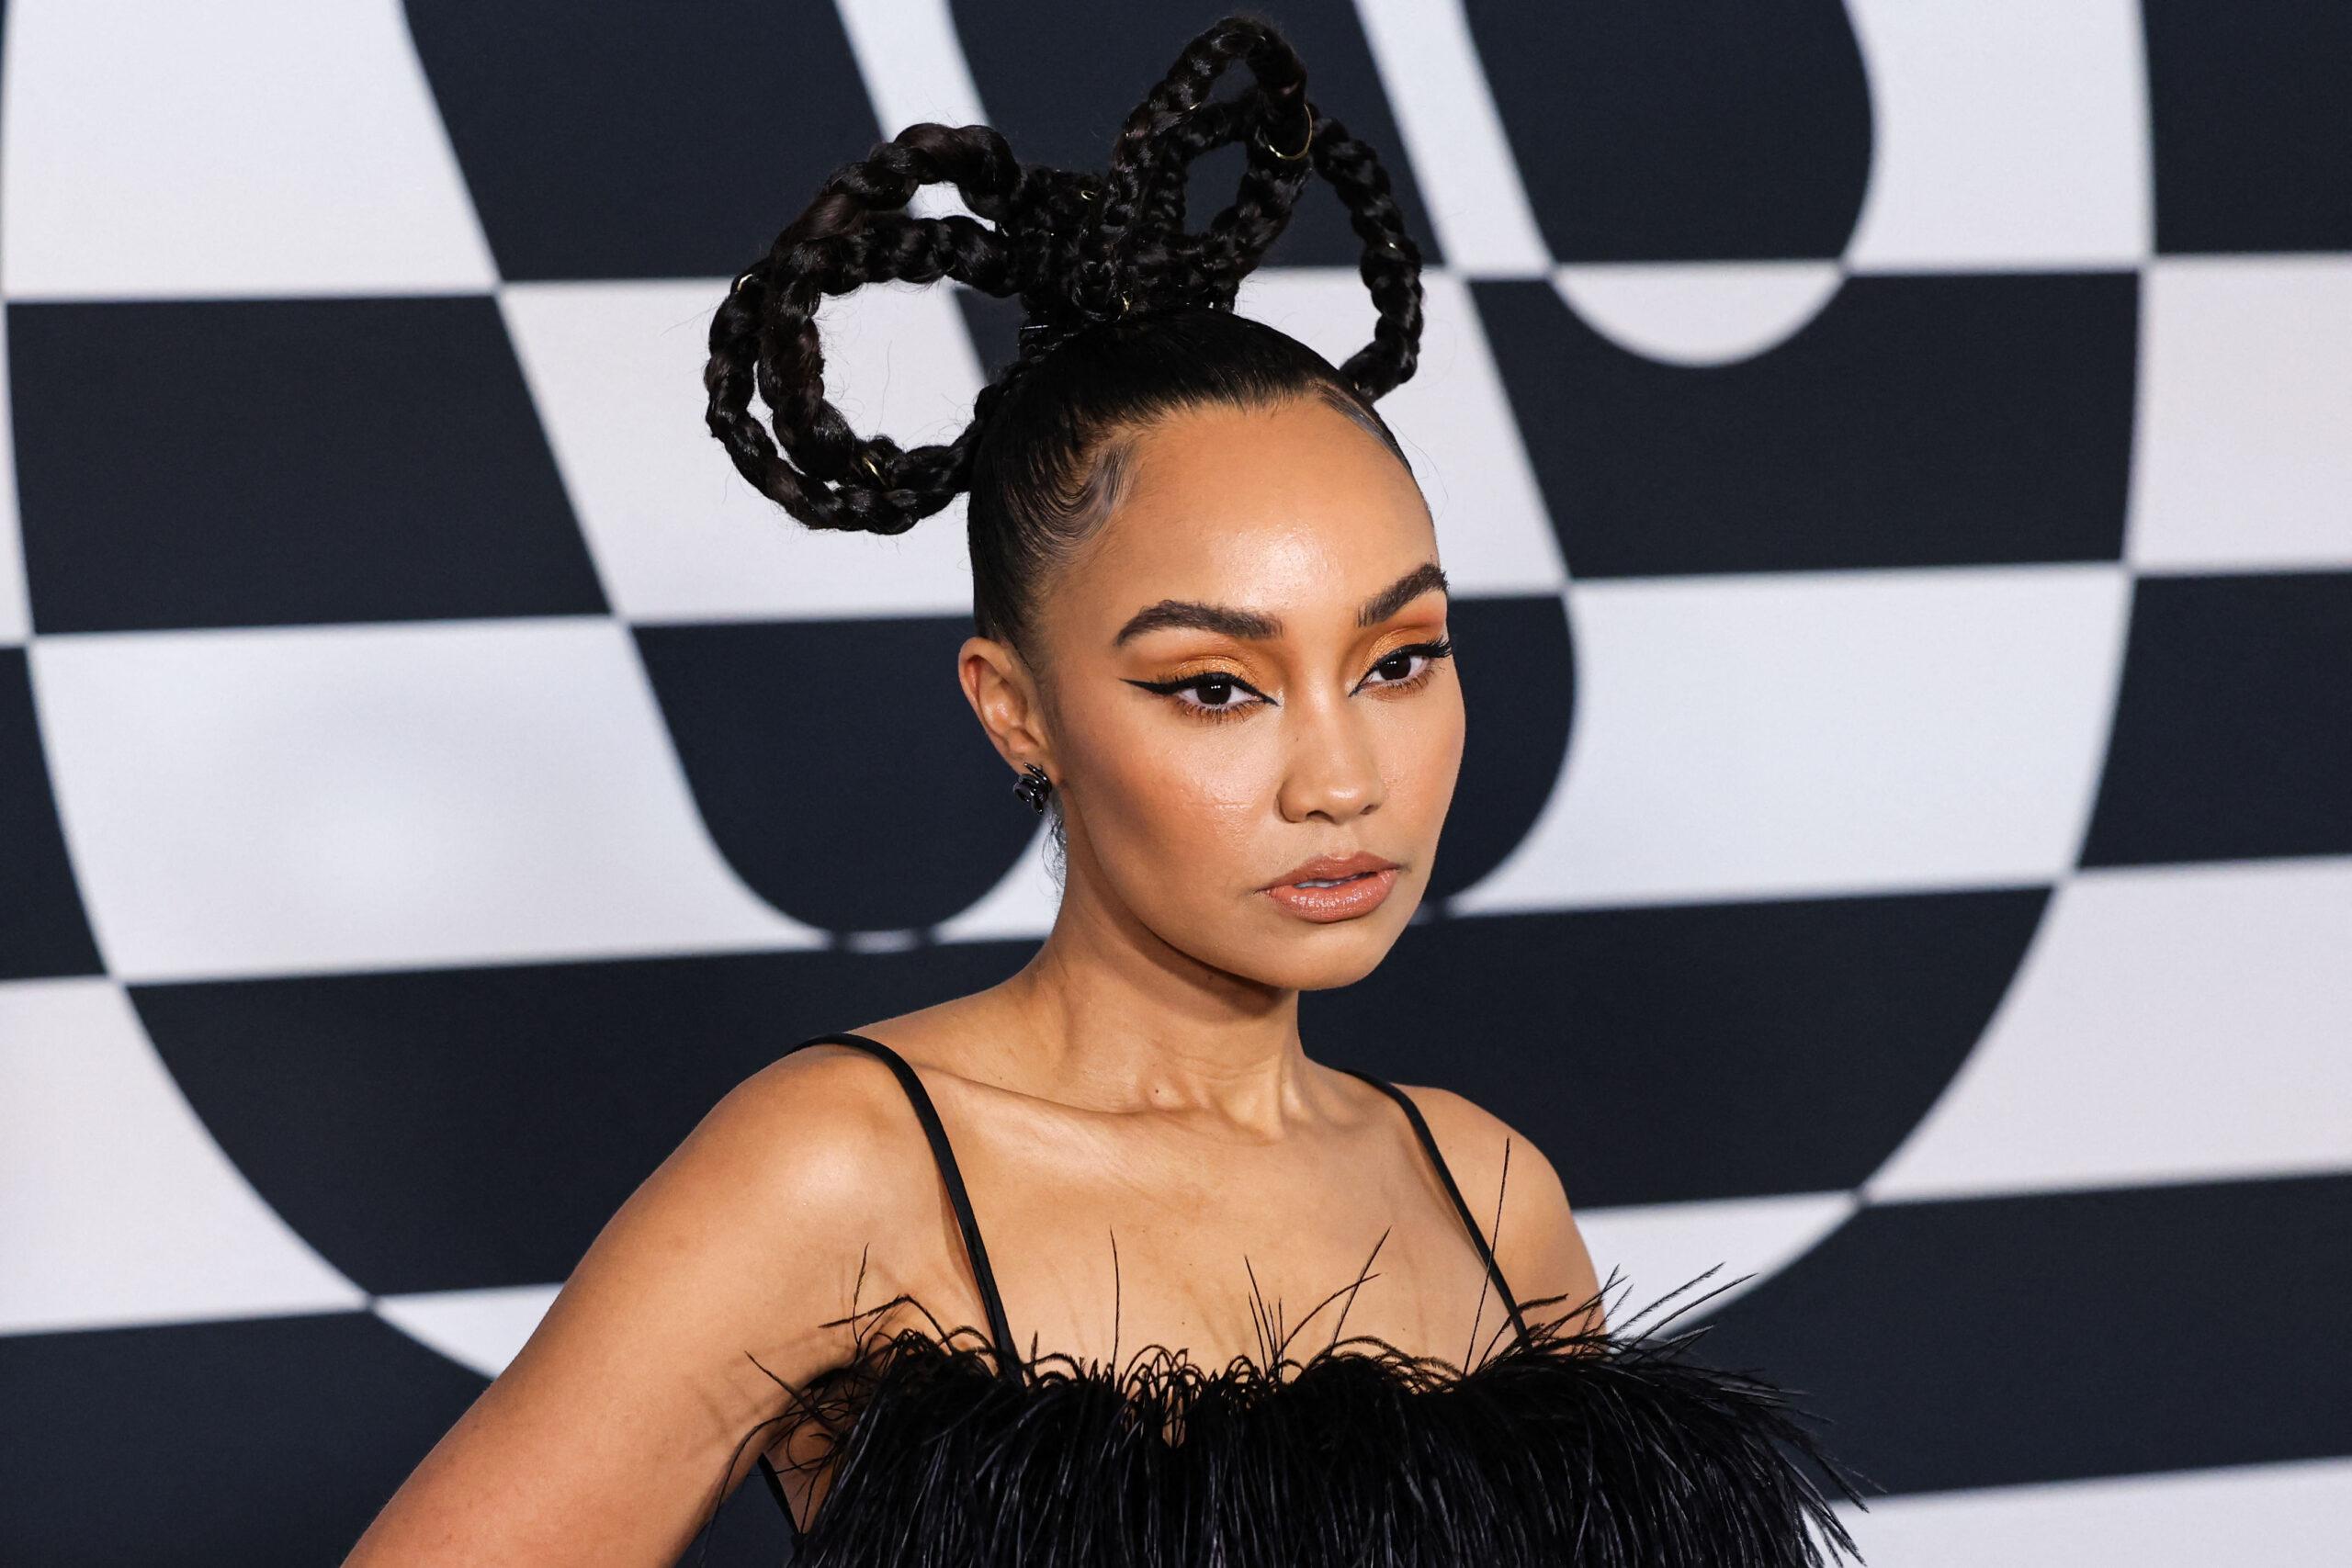 Little Mix's Leigh-Anne Pinnock Set To Kick Off Solo Career With Big Budget Music Video